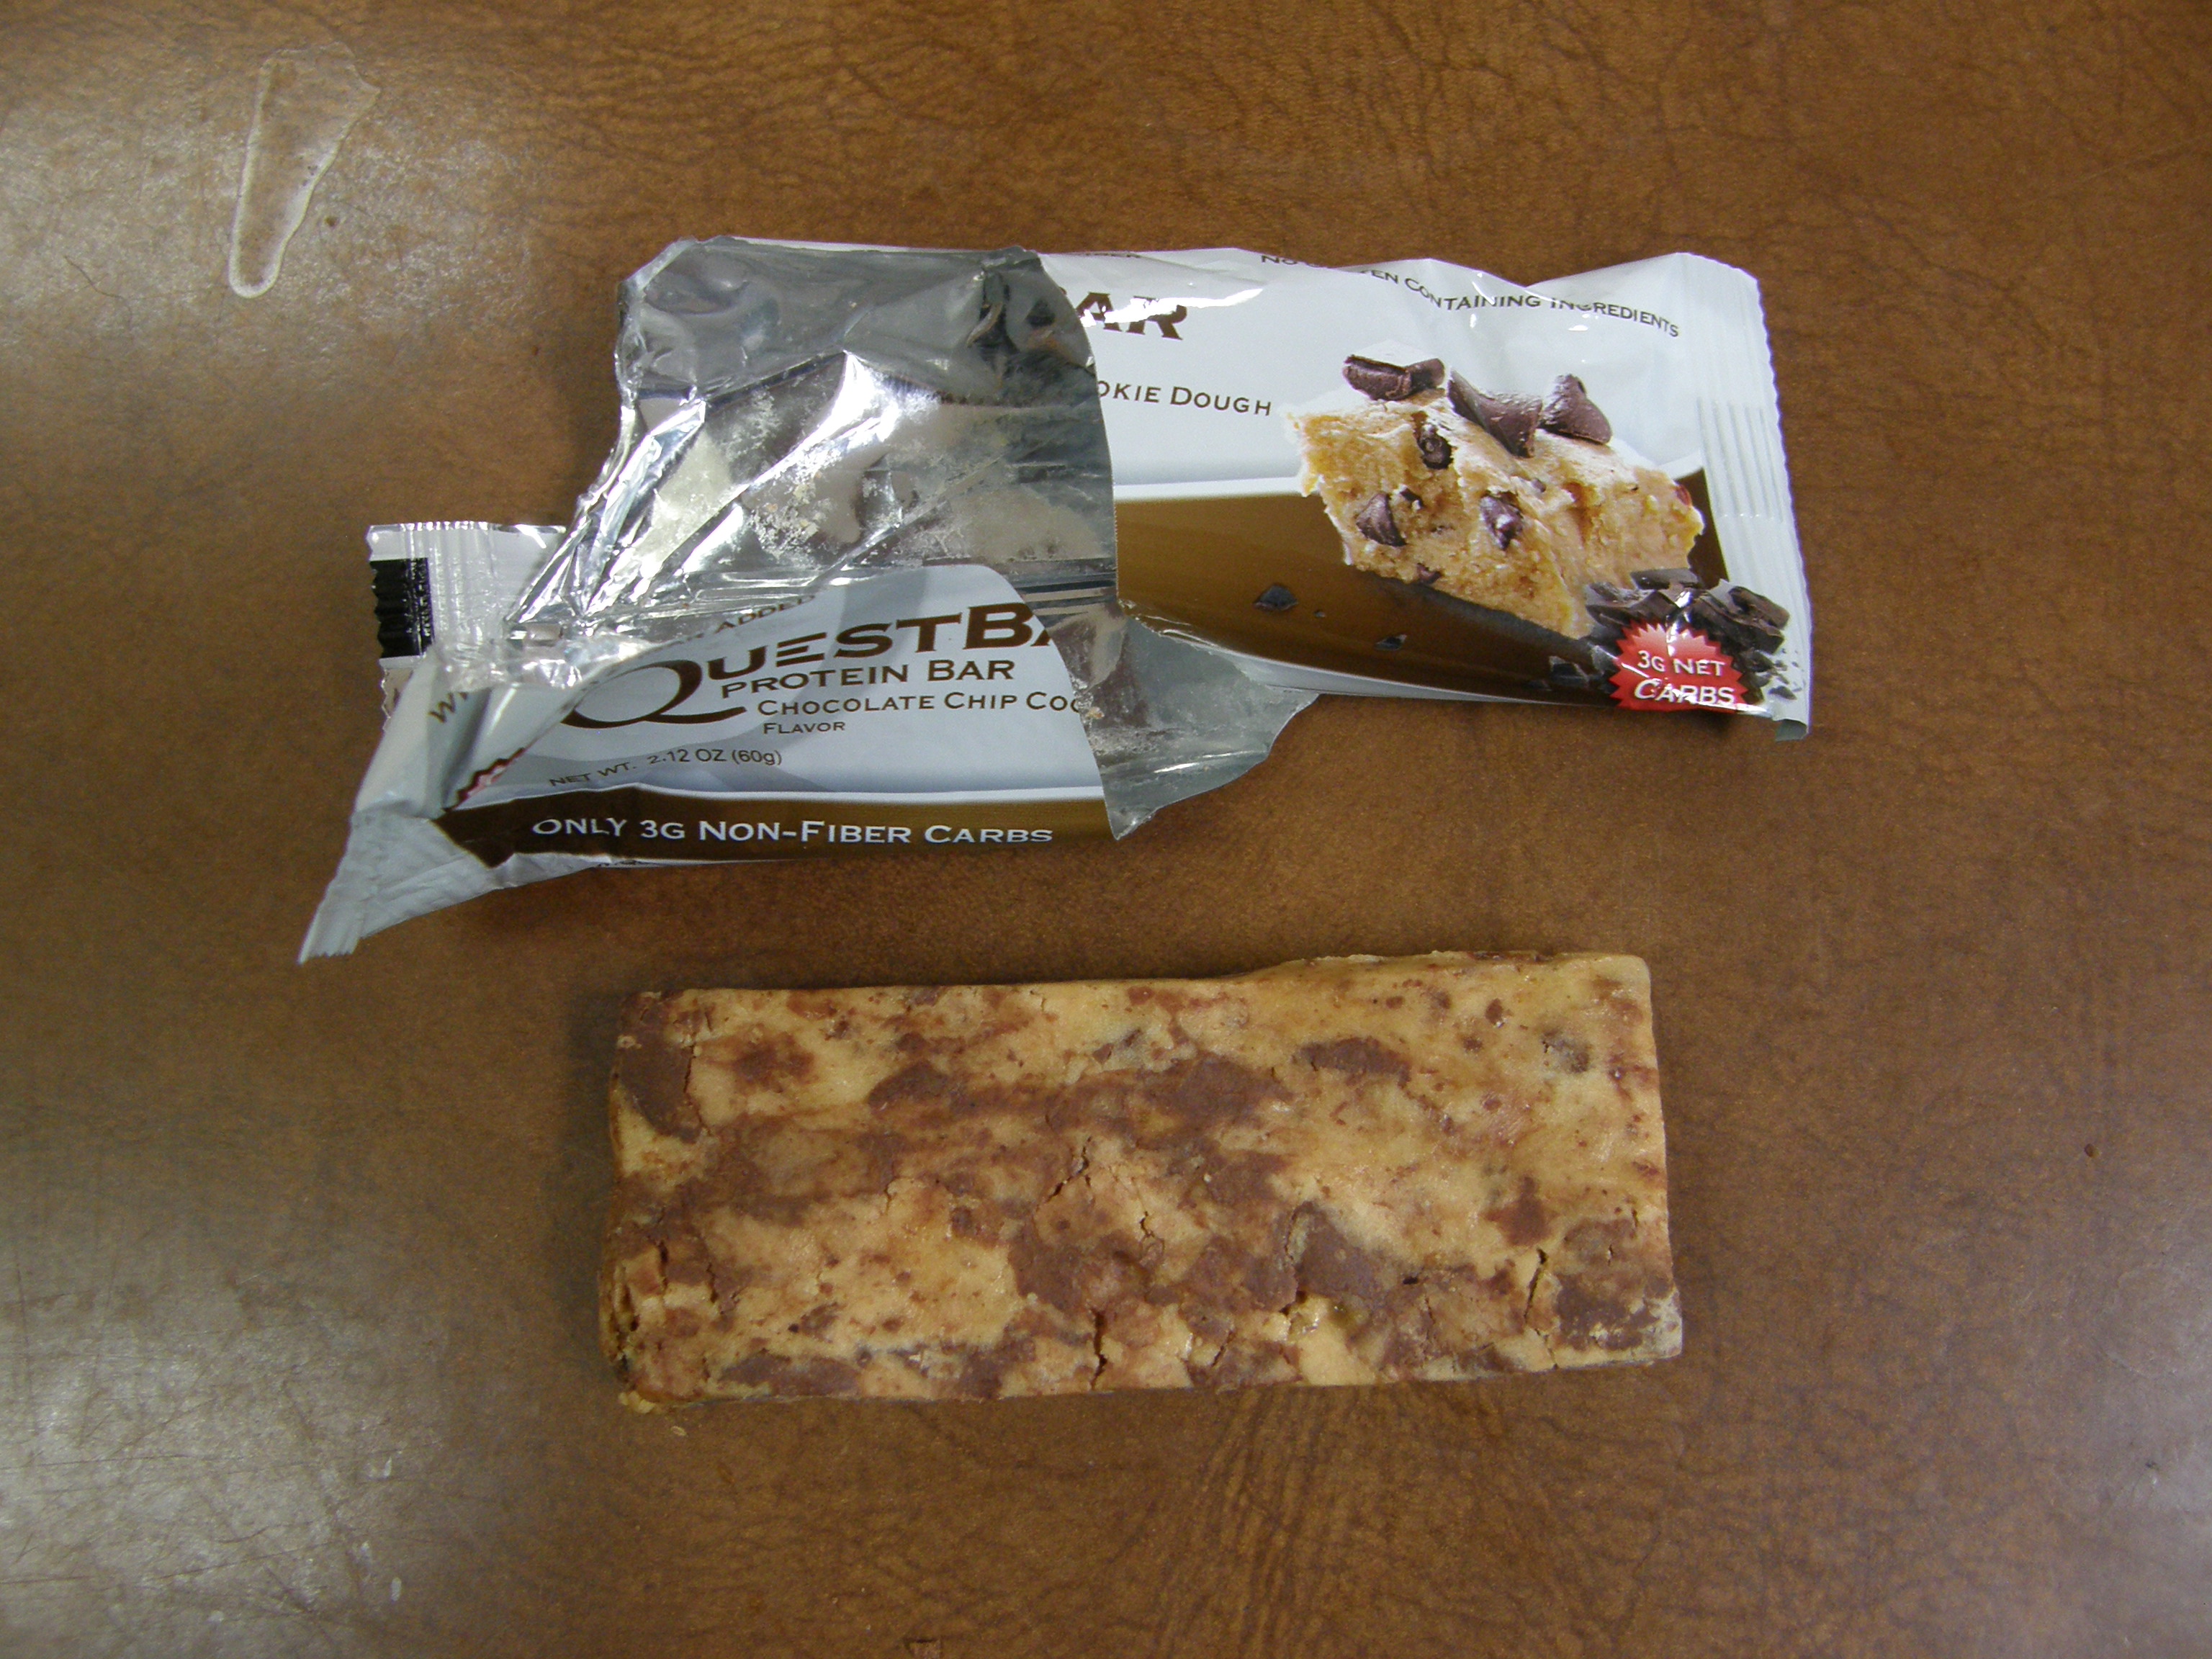 protein bars